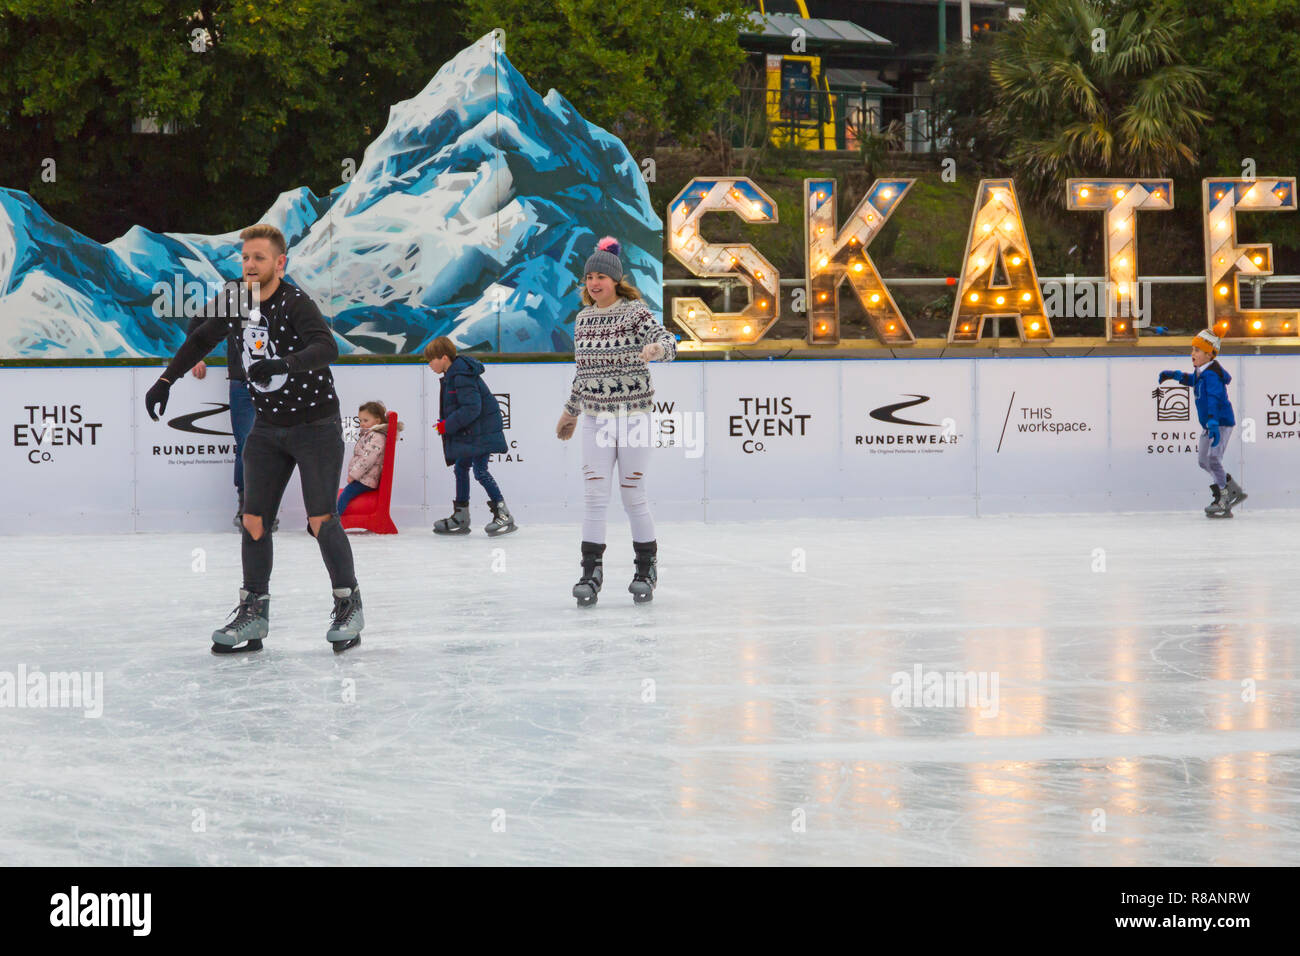 Bournemouth, Dorset, UK. 14th December 2018. Visitors have fun ice skating on the outdoors temporary ice rink in Bournemouth Gardens on a bitterly cold overcast day. Couple skate in their Christmas jumpers. Skating in festive jumper - very appropriate with snowman and snow, being the weather forecast for next few days!  Credit: Carolyn Jenkins/Alamy Live News Stock Photo